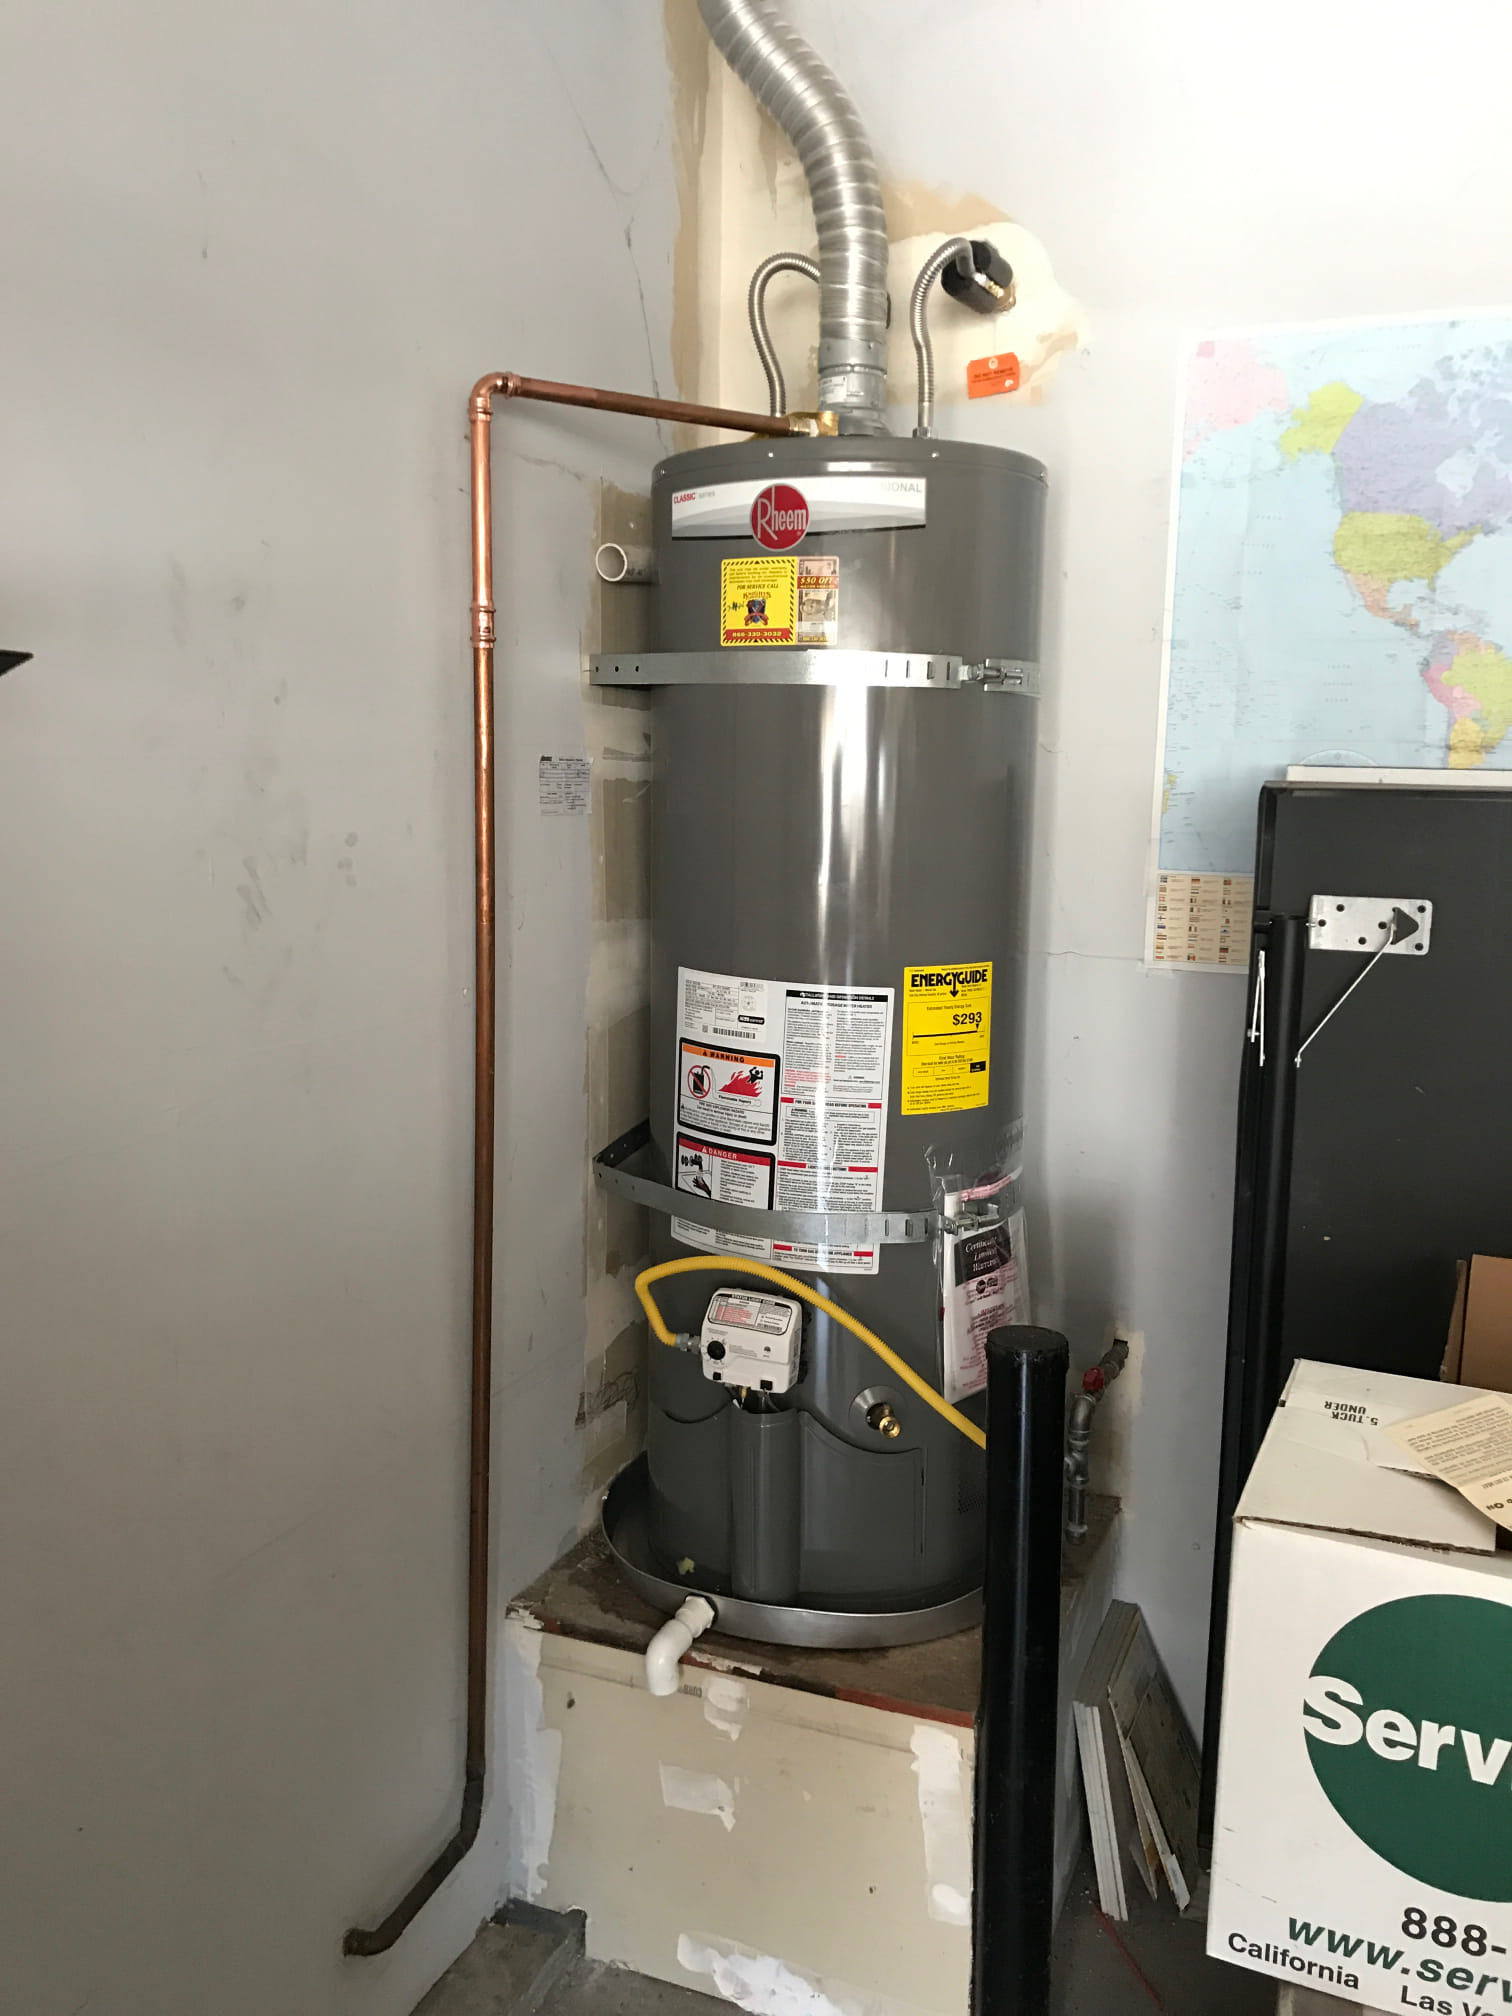 Leaking Water Heater Replacement In Stockton, CA